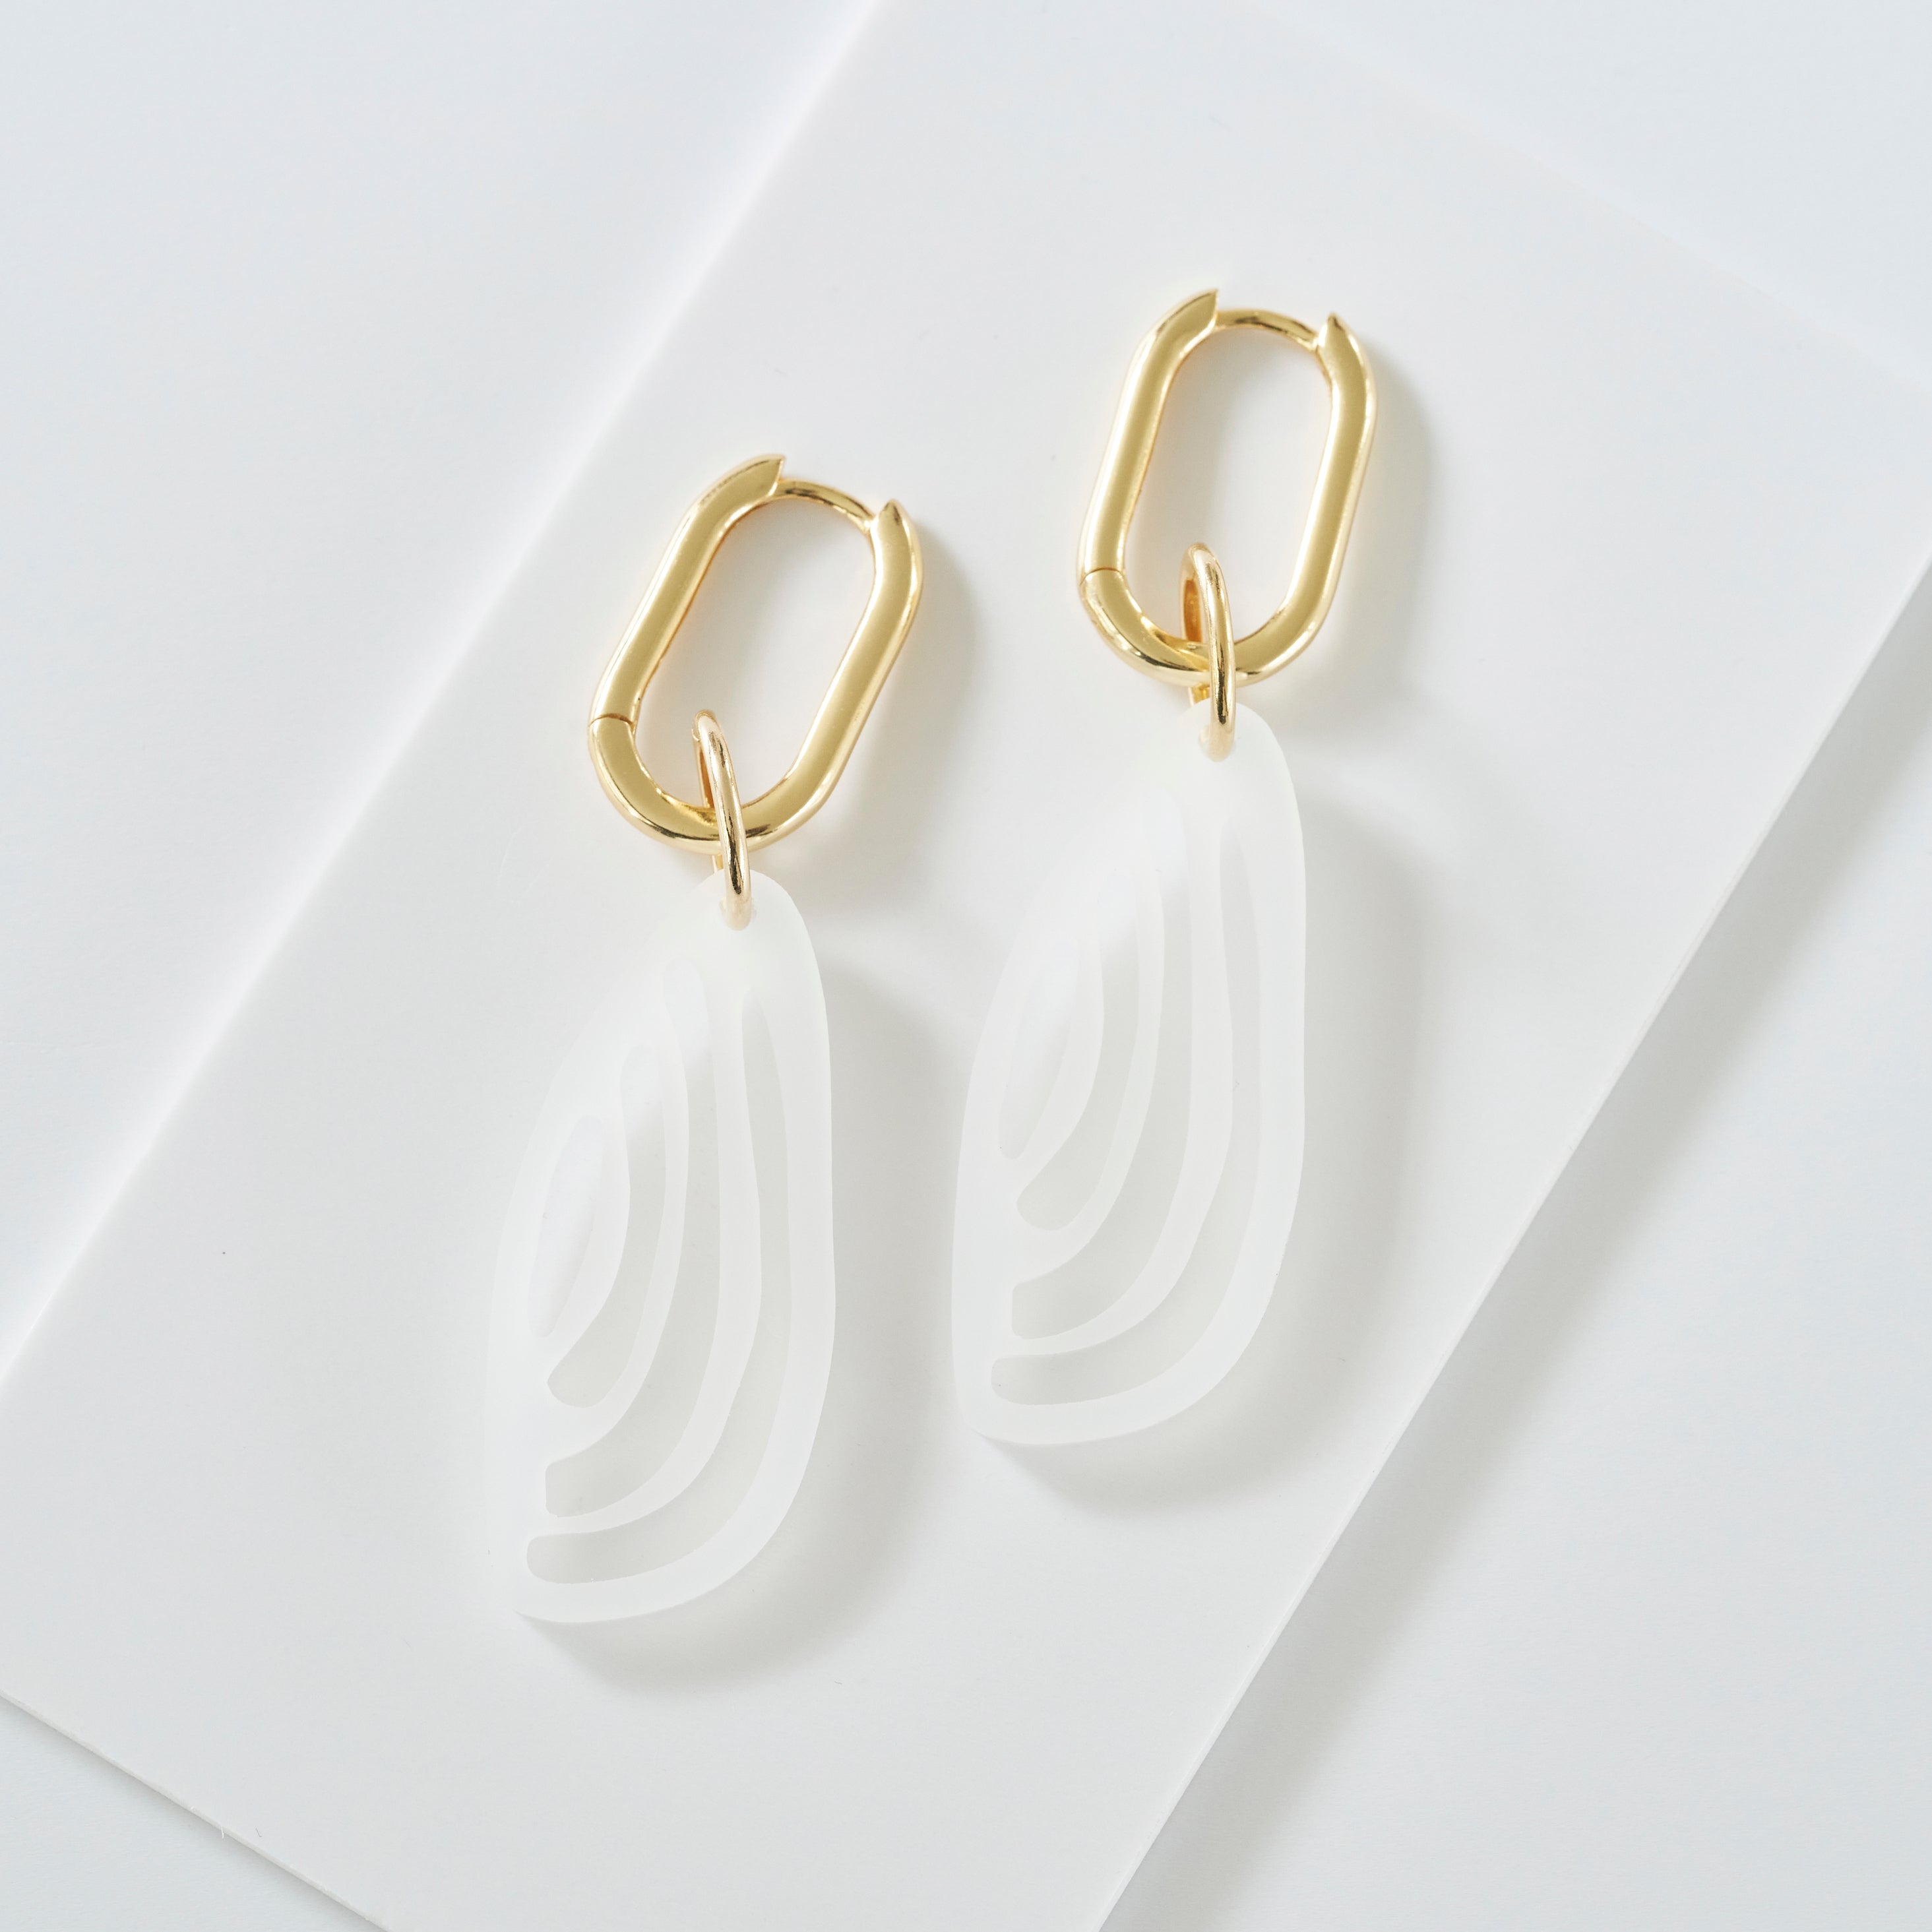 Kiana - frosted white with gold-plated hoops